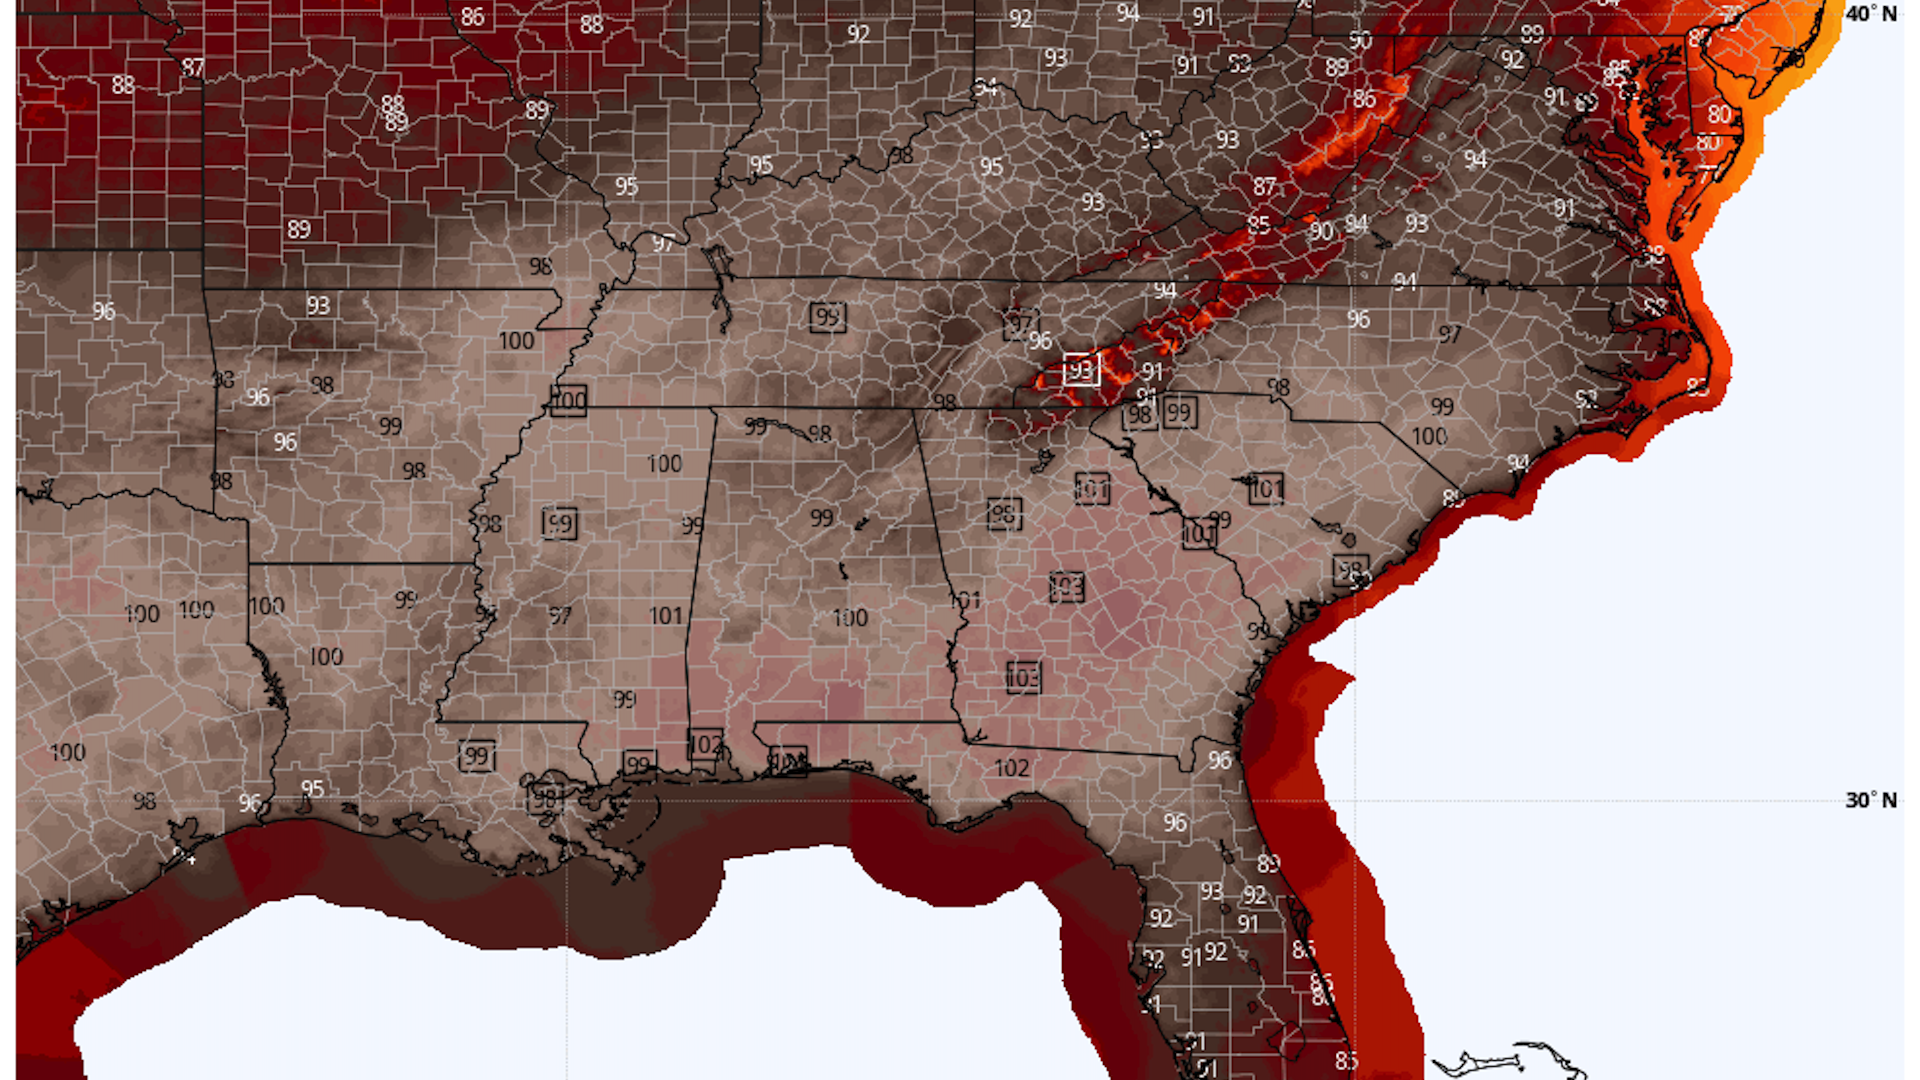 Forecast high temperatures including daily records across the Southeast on June 22, 2022.